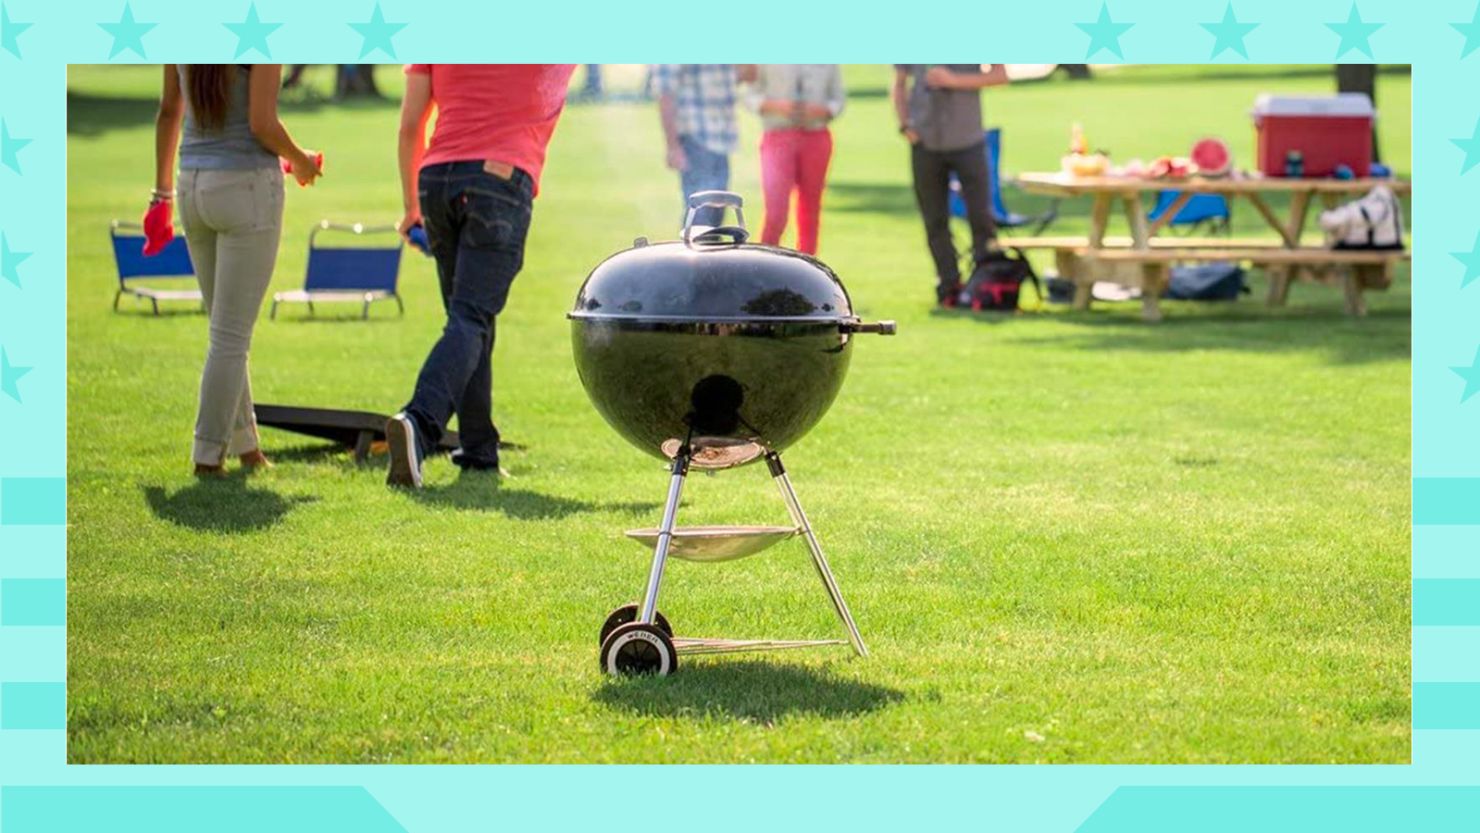 Lowe's sale has great deals on grills, patio furniture, grill